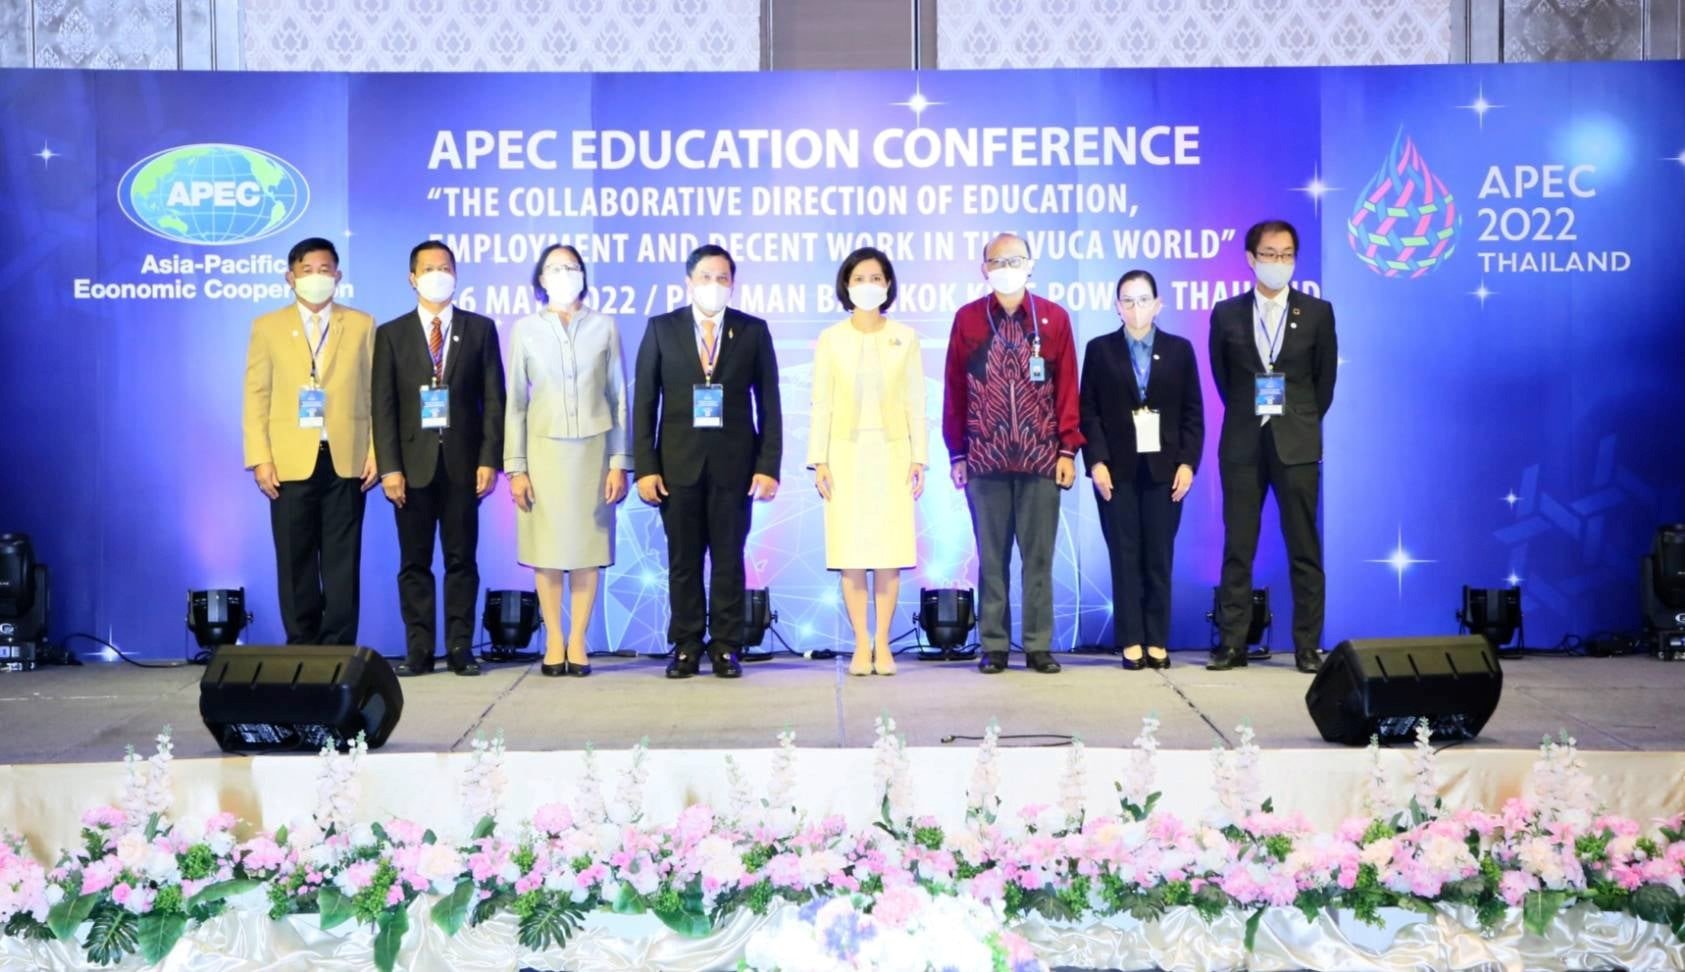 Office of the Education Council hosts APEC Education Conference : Brainstorming for reforming education system and upskilling workers  for the VUCA WORLD